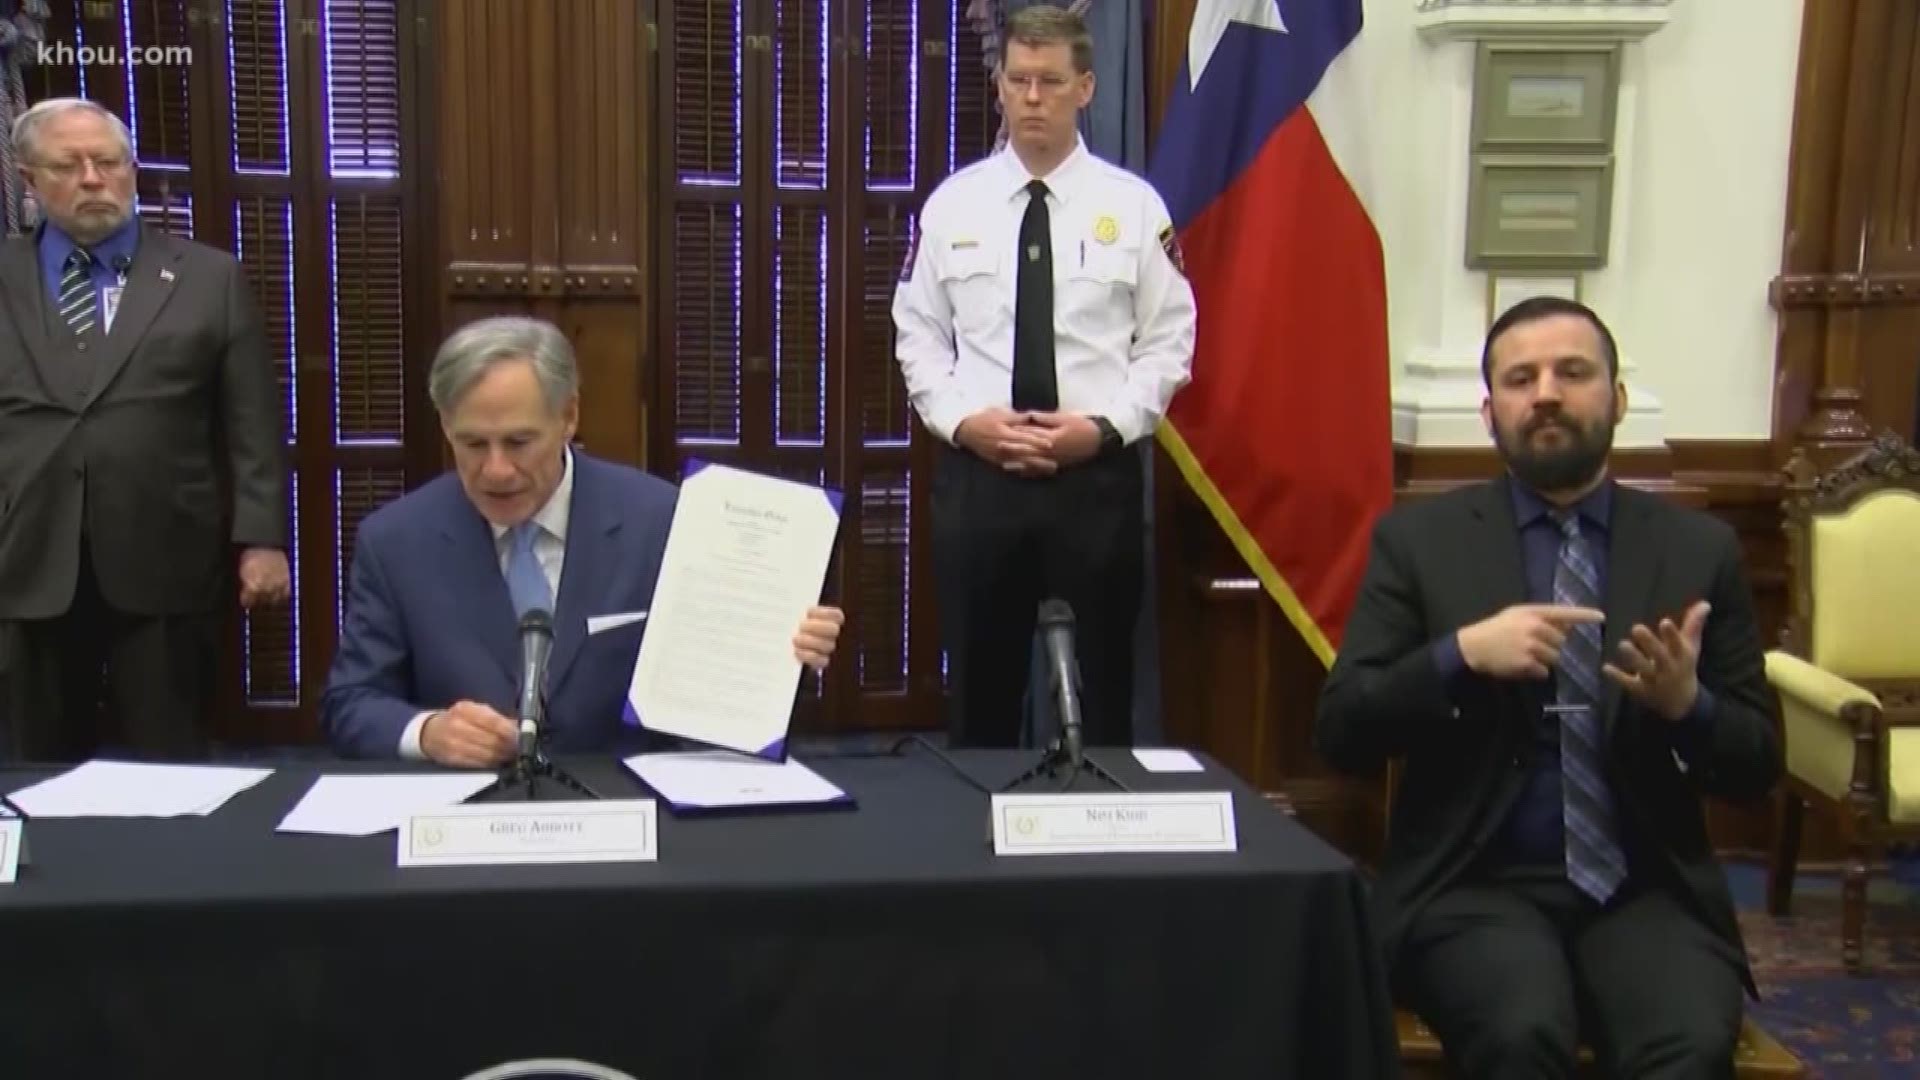 Gov. Greg Abbott issued executive orders to deal with the shortage of nurses, hospital beds and supplies.